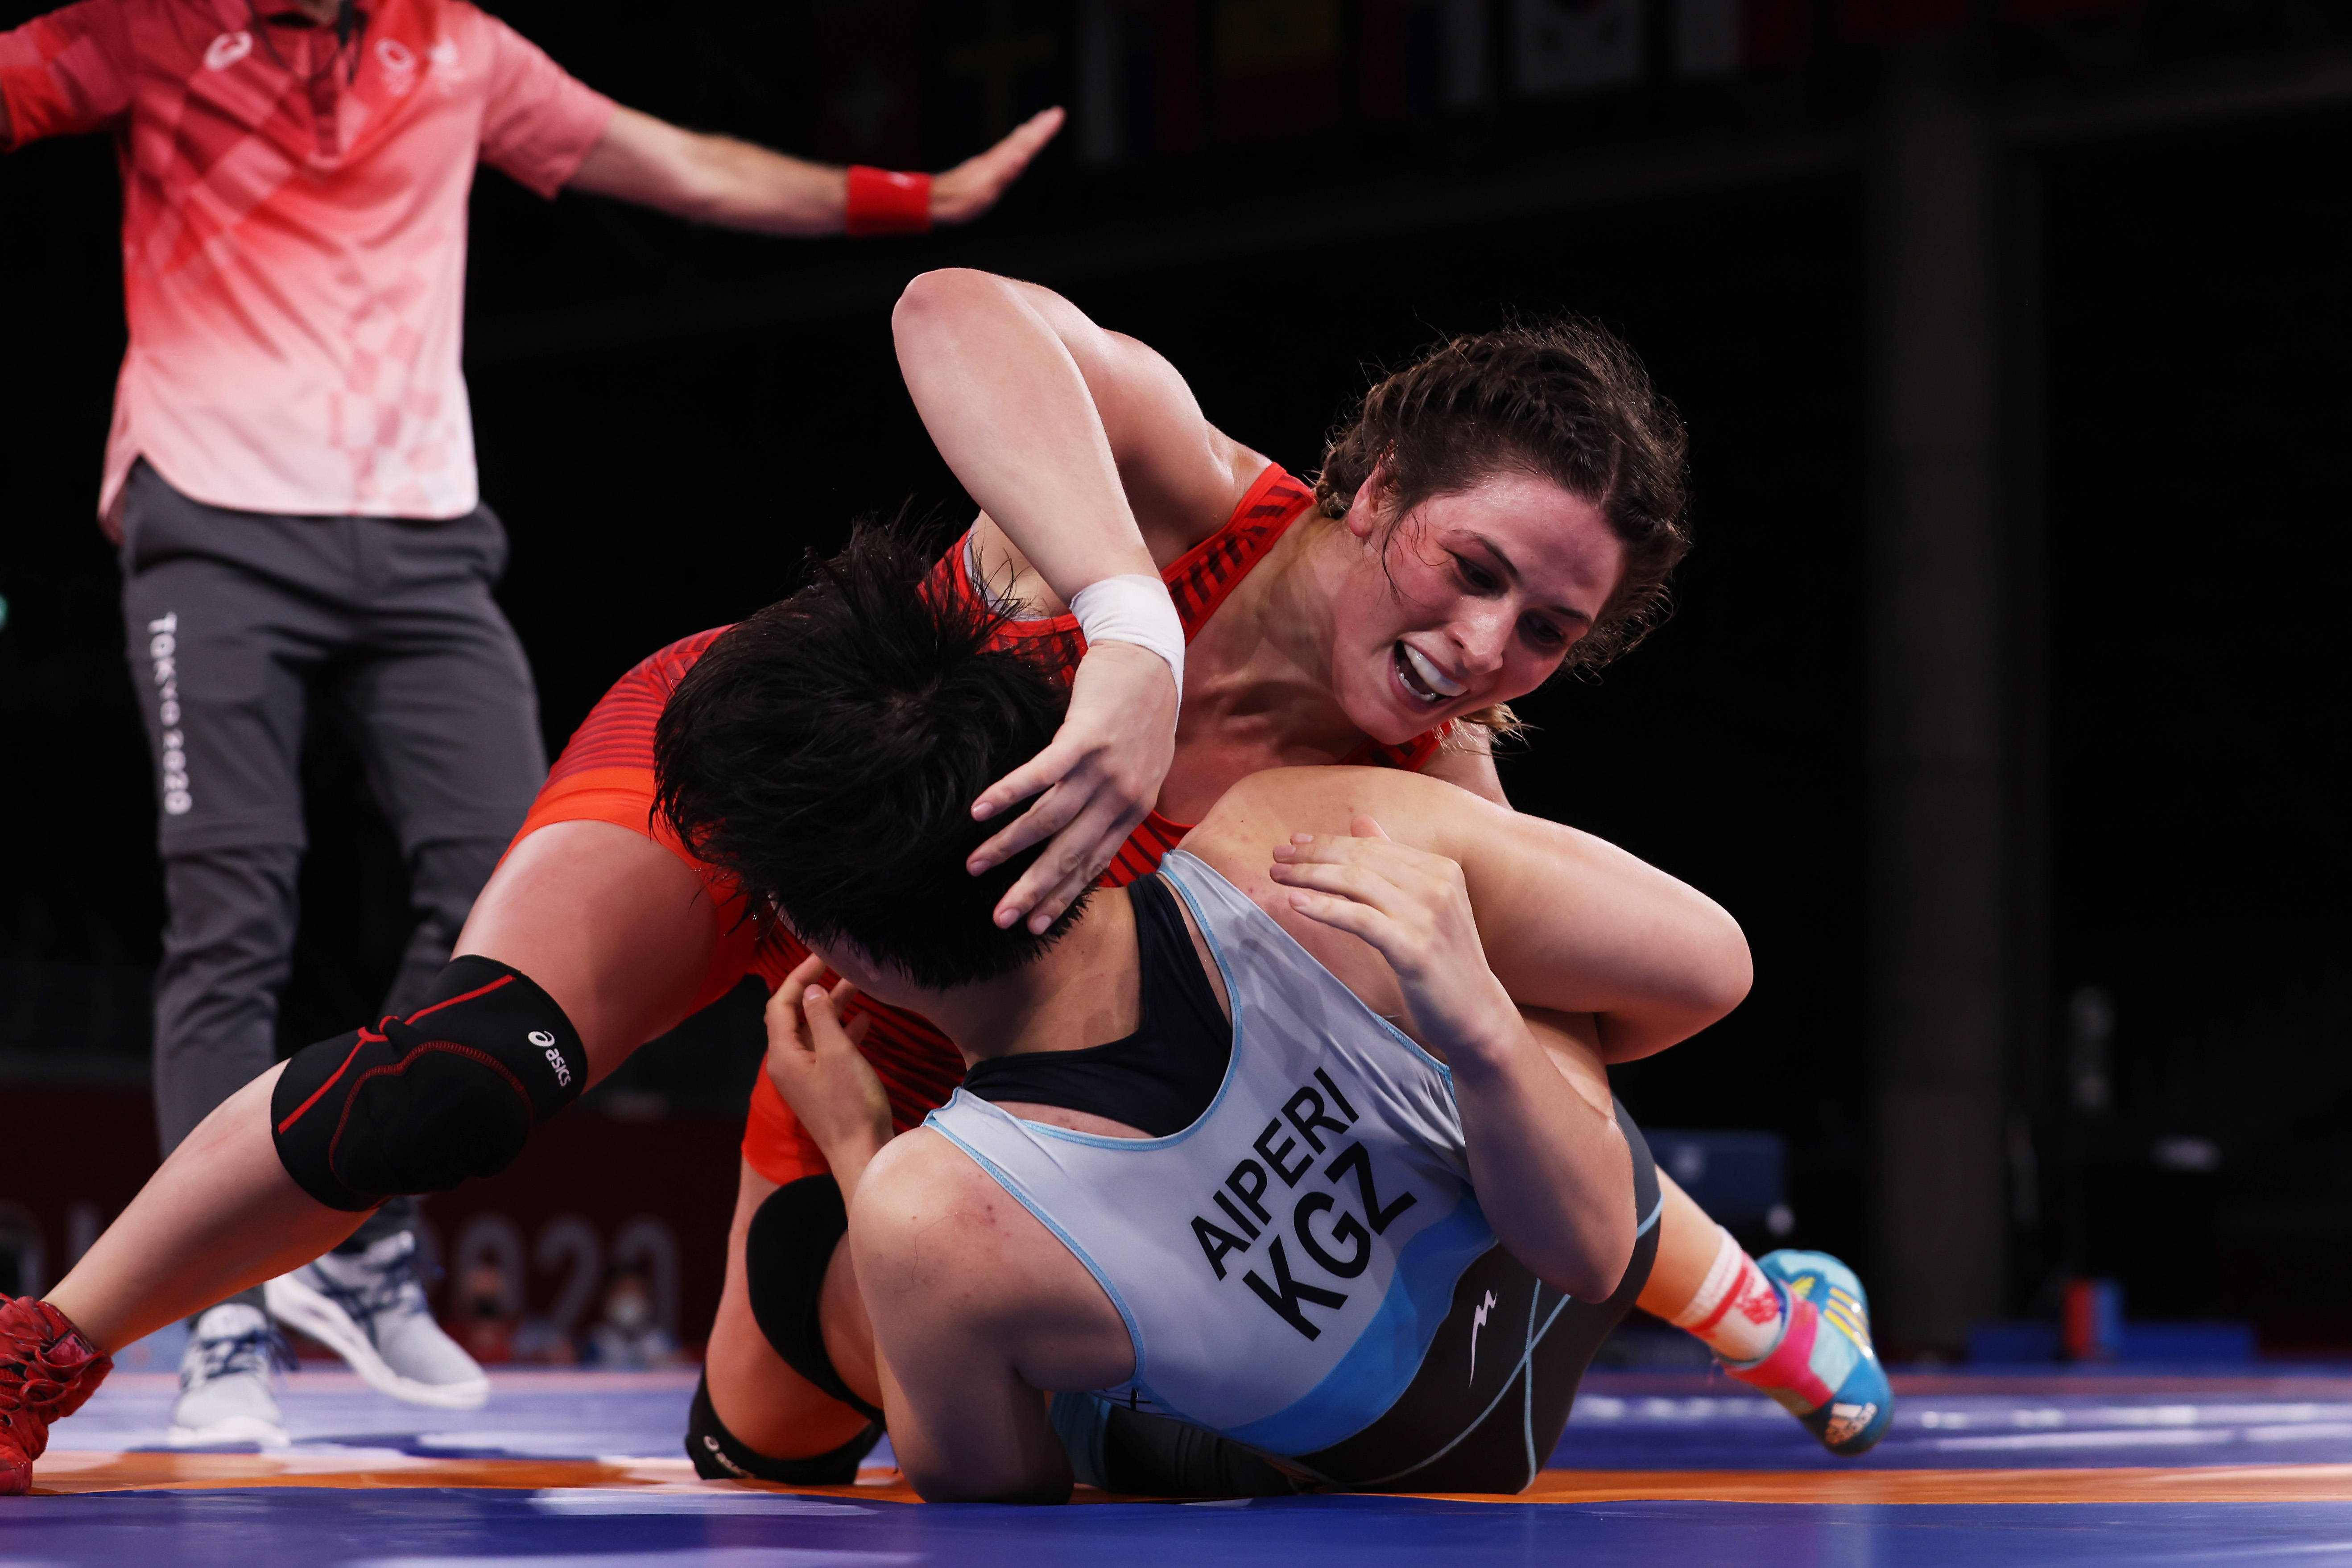 USA's Adeline Gray in Finals of Women's 76kg Freestyle Wrestling